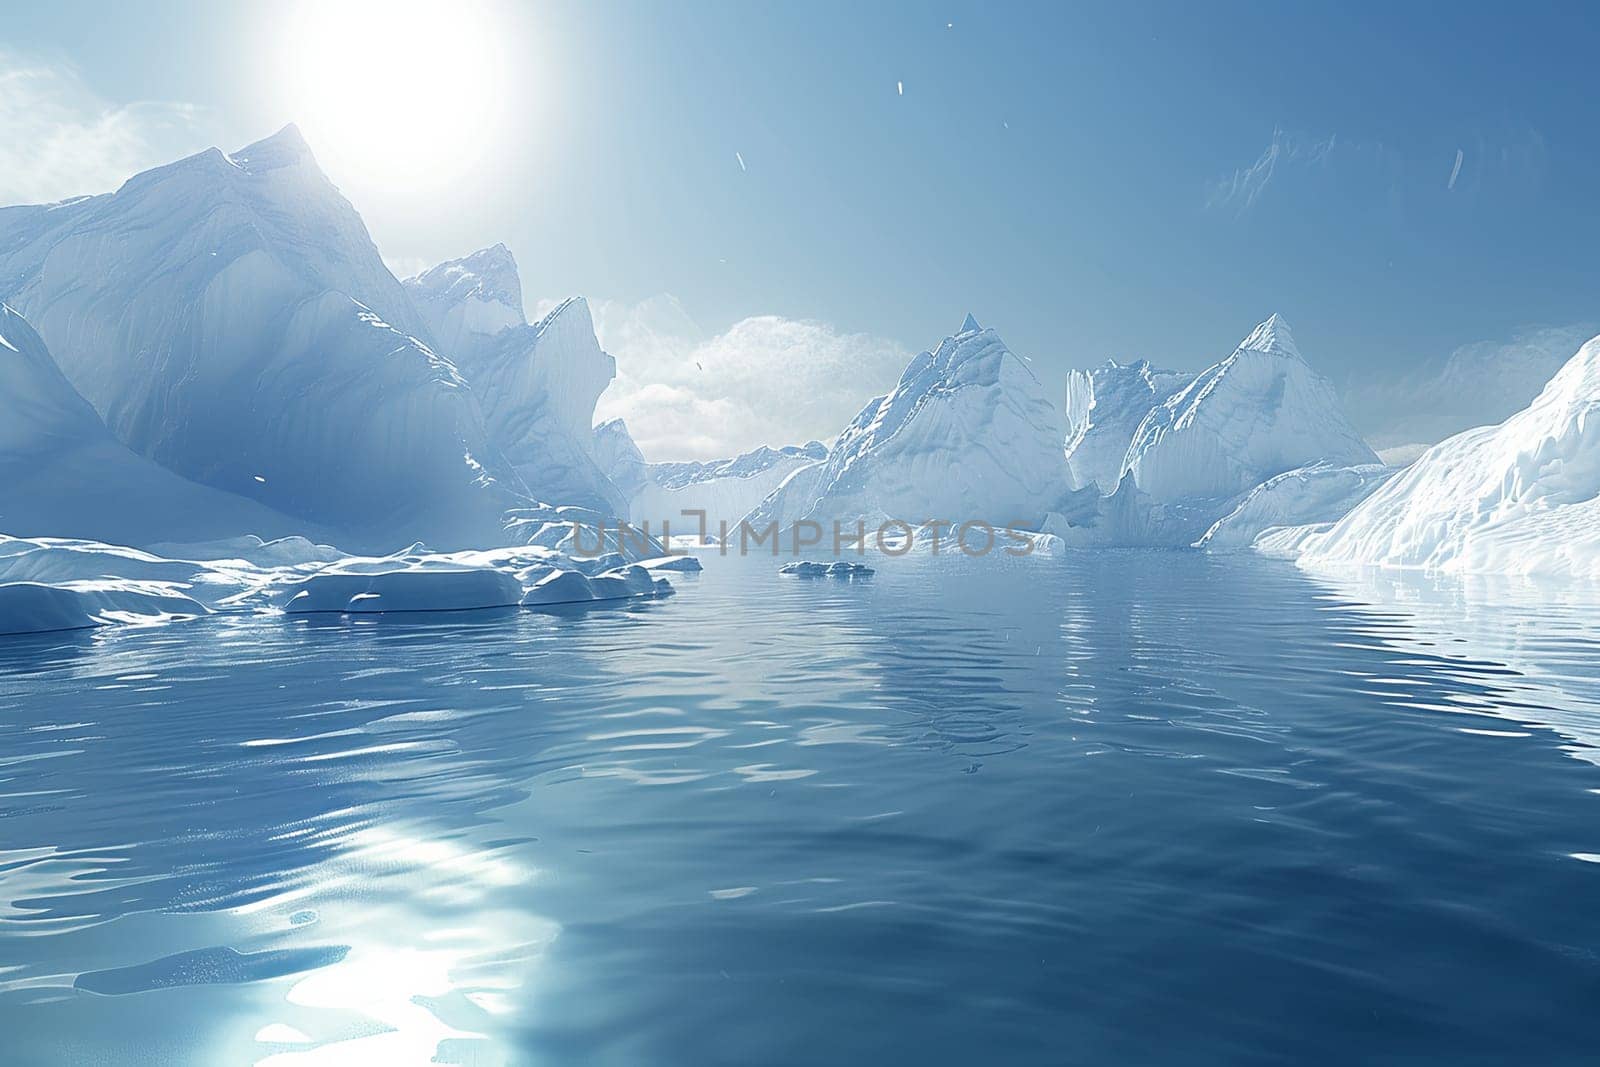 Multiple icebergs are seen floating in the ocean, reflecting light on their icy surface.